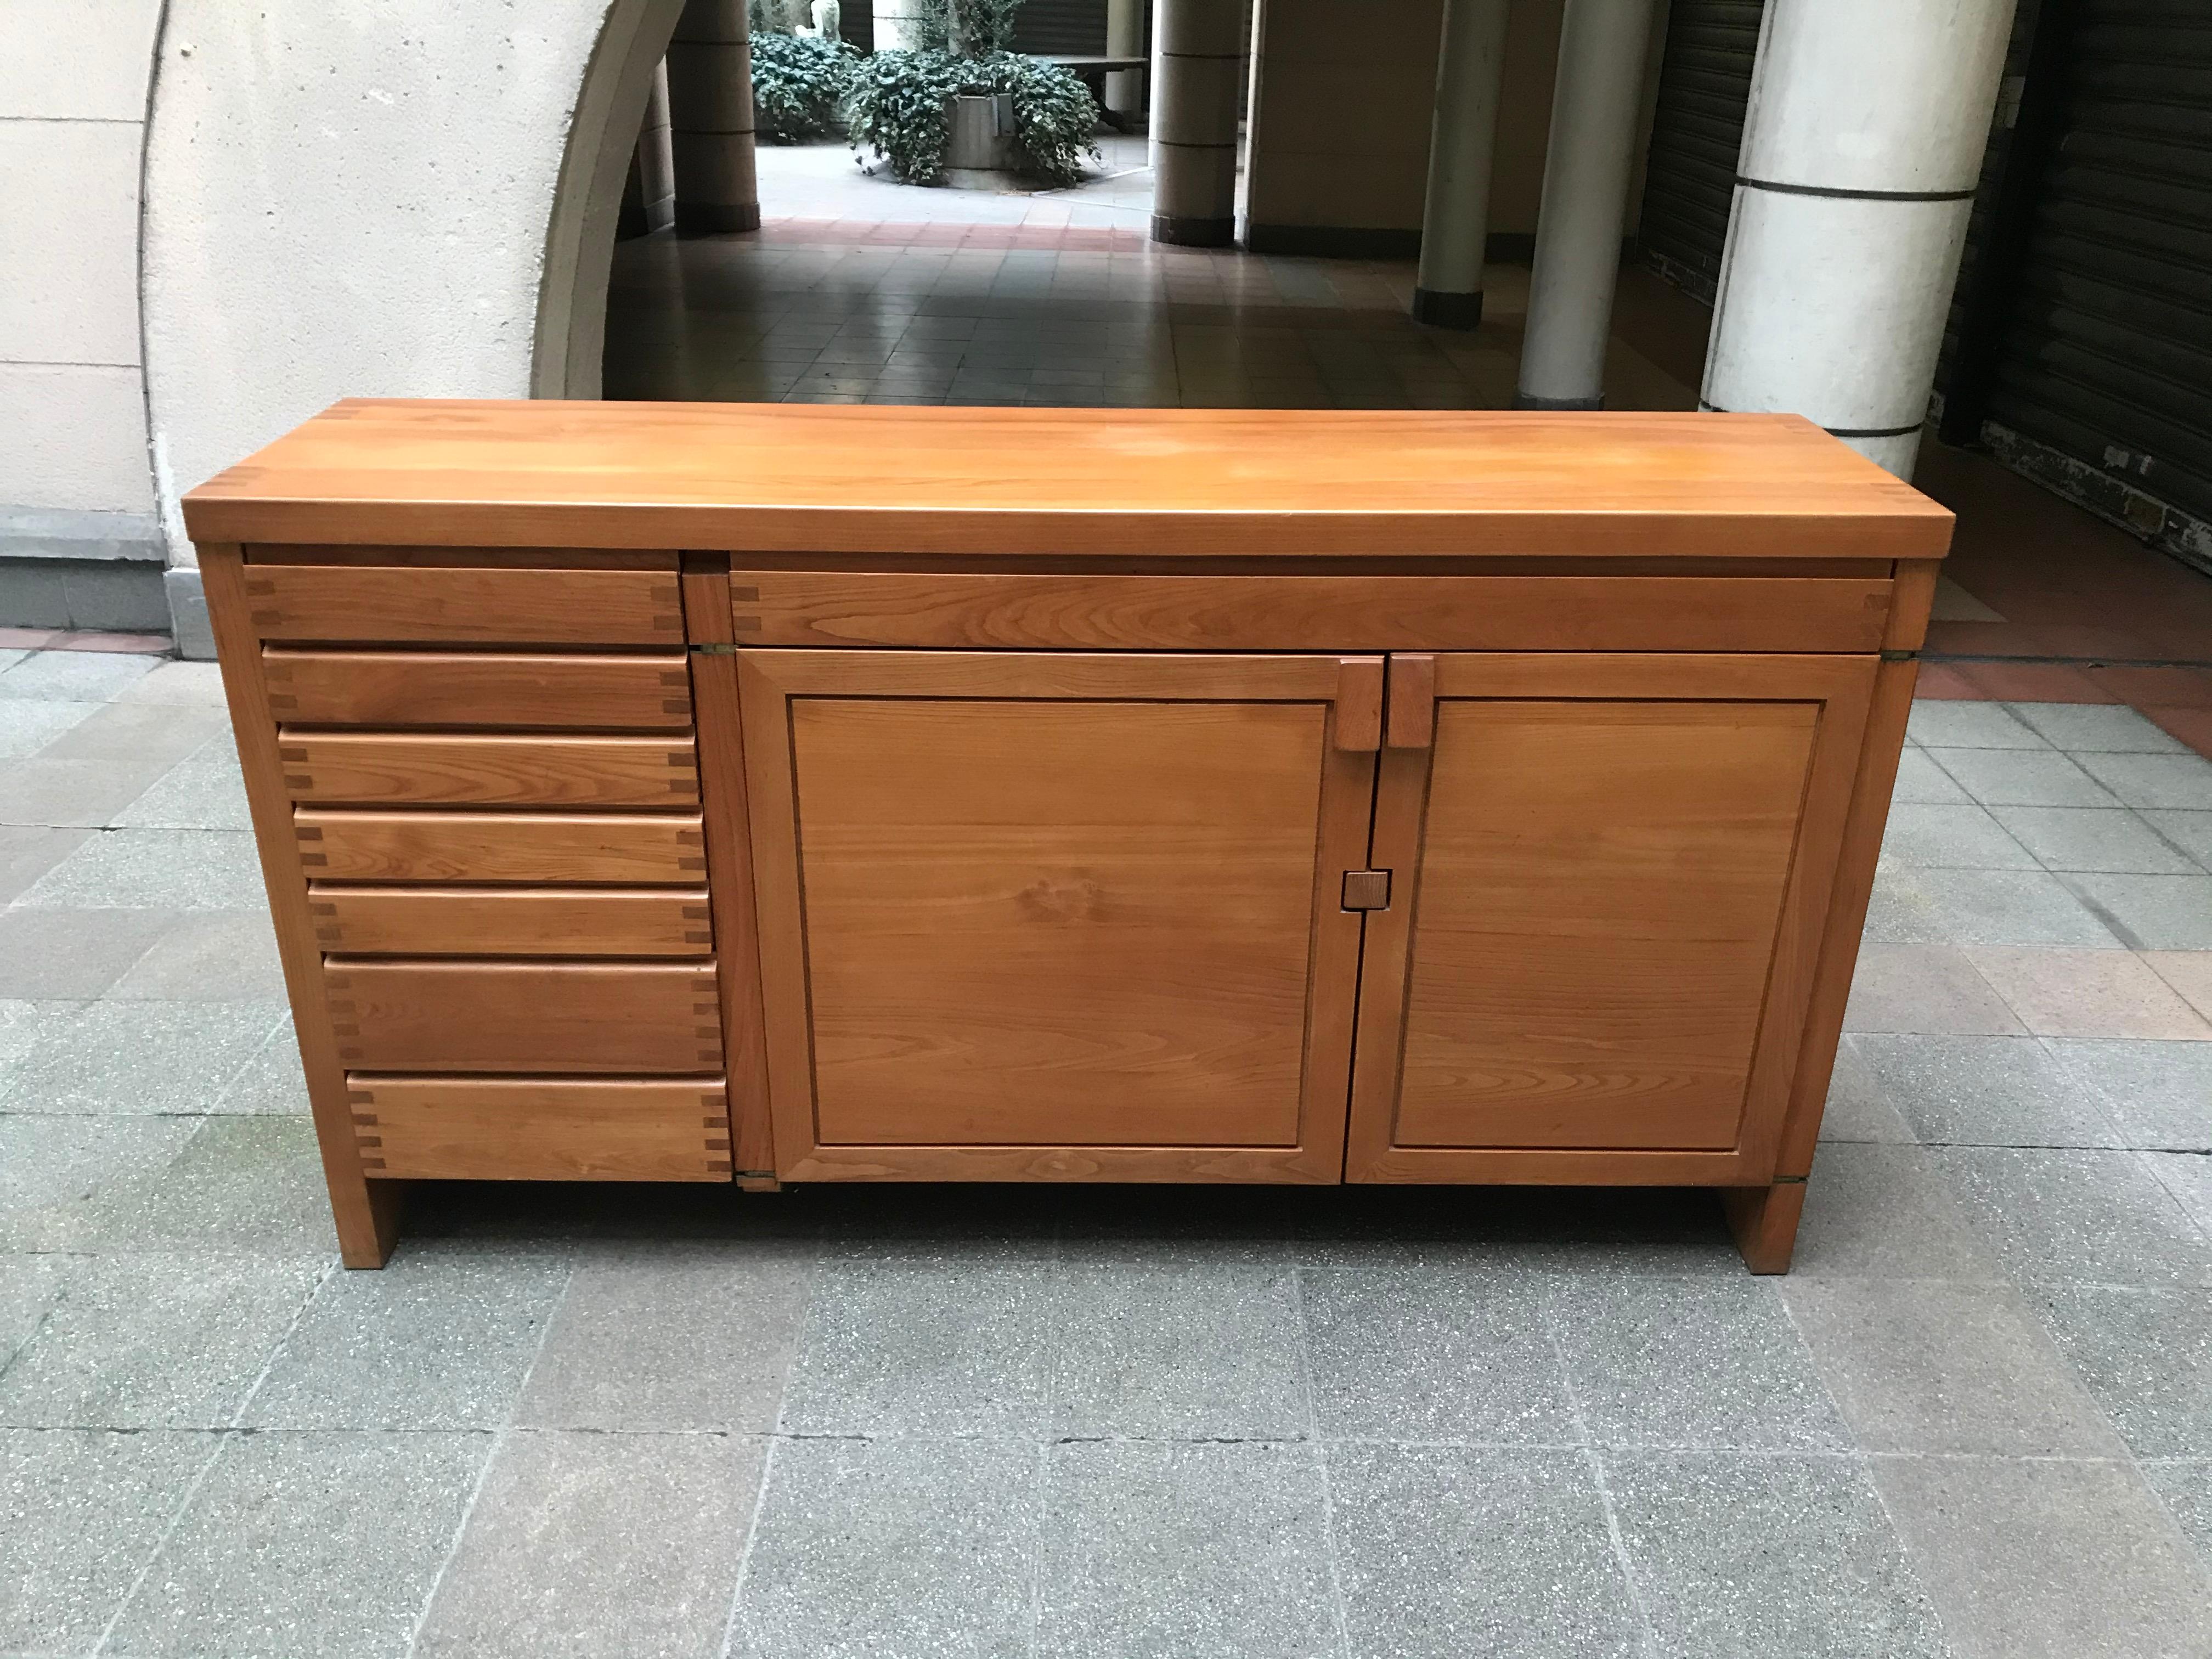 Pierre Chapo
Mythical buffet/ R13 enfilade
Solid elm/ brass fittings,
circa 1974
Measures: 183 x 100 x 46 cms
8 drawers
Perfect condition
6900 Euros.